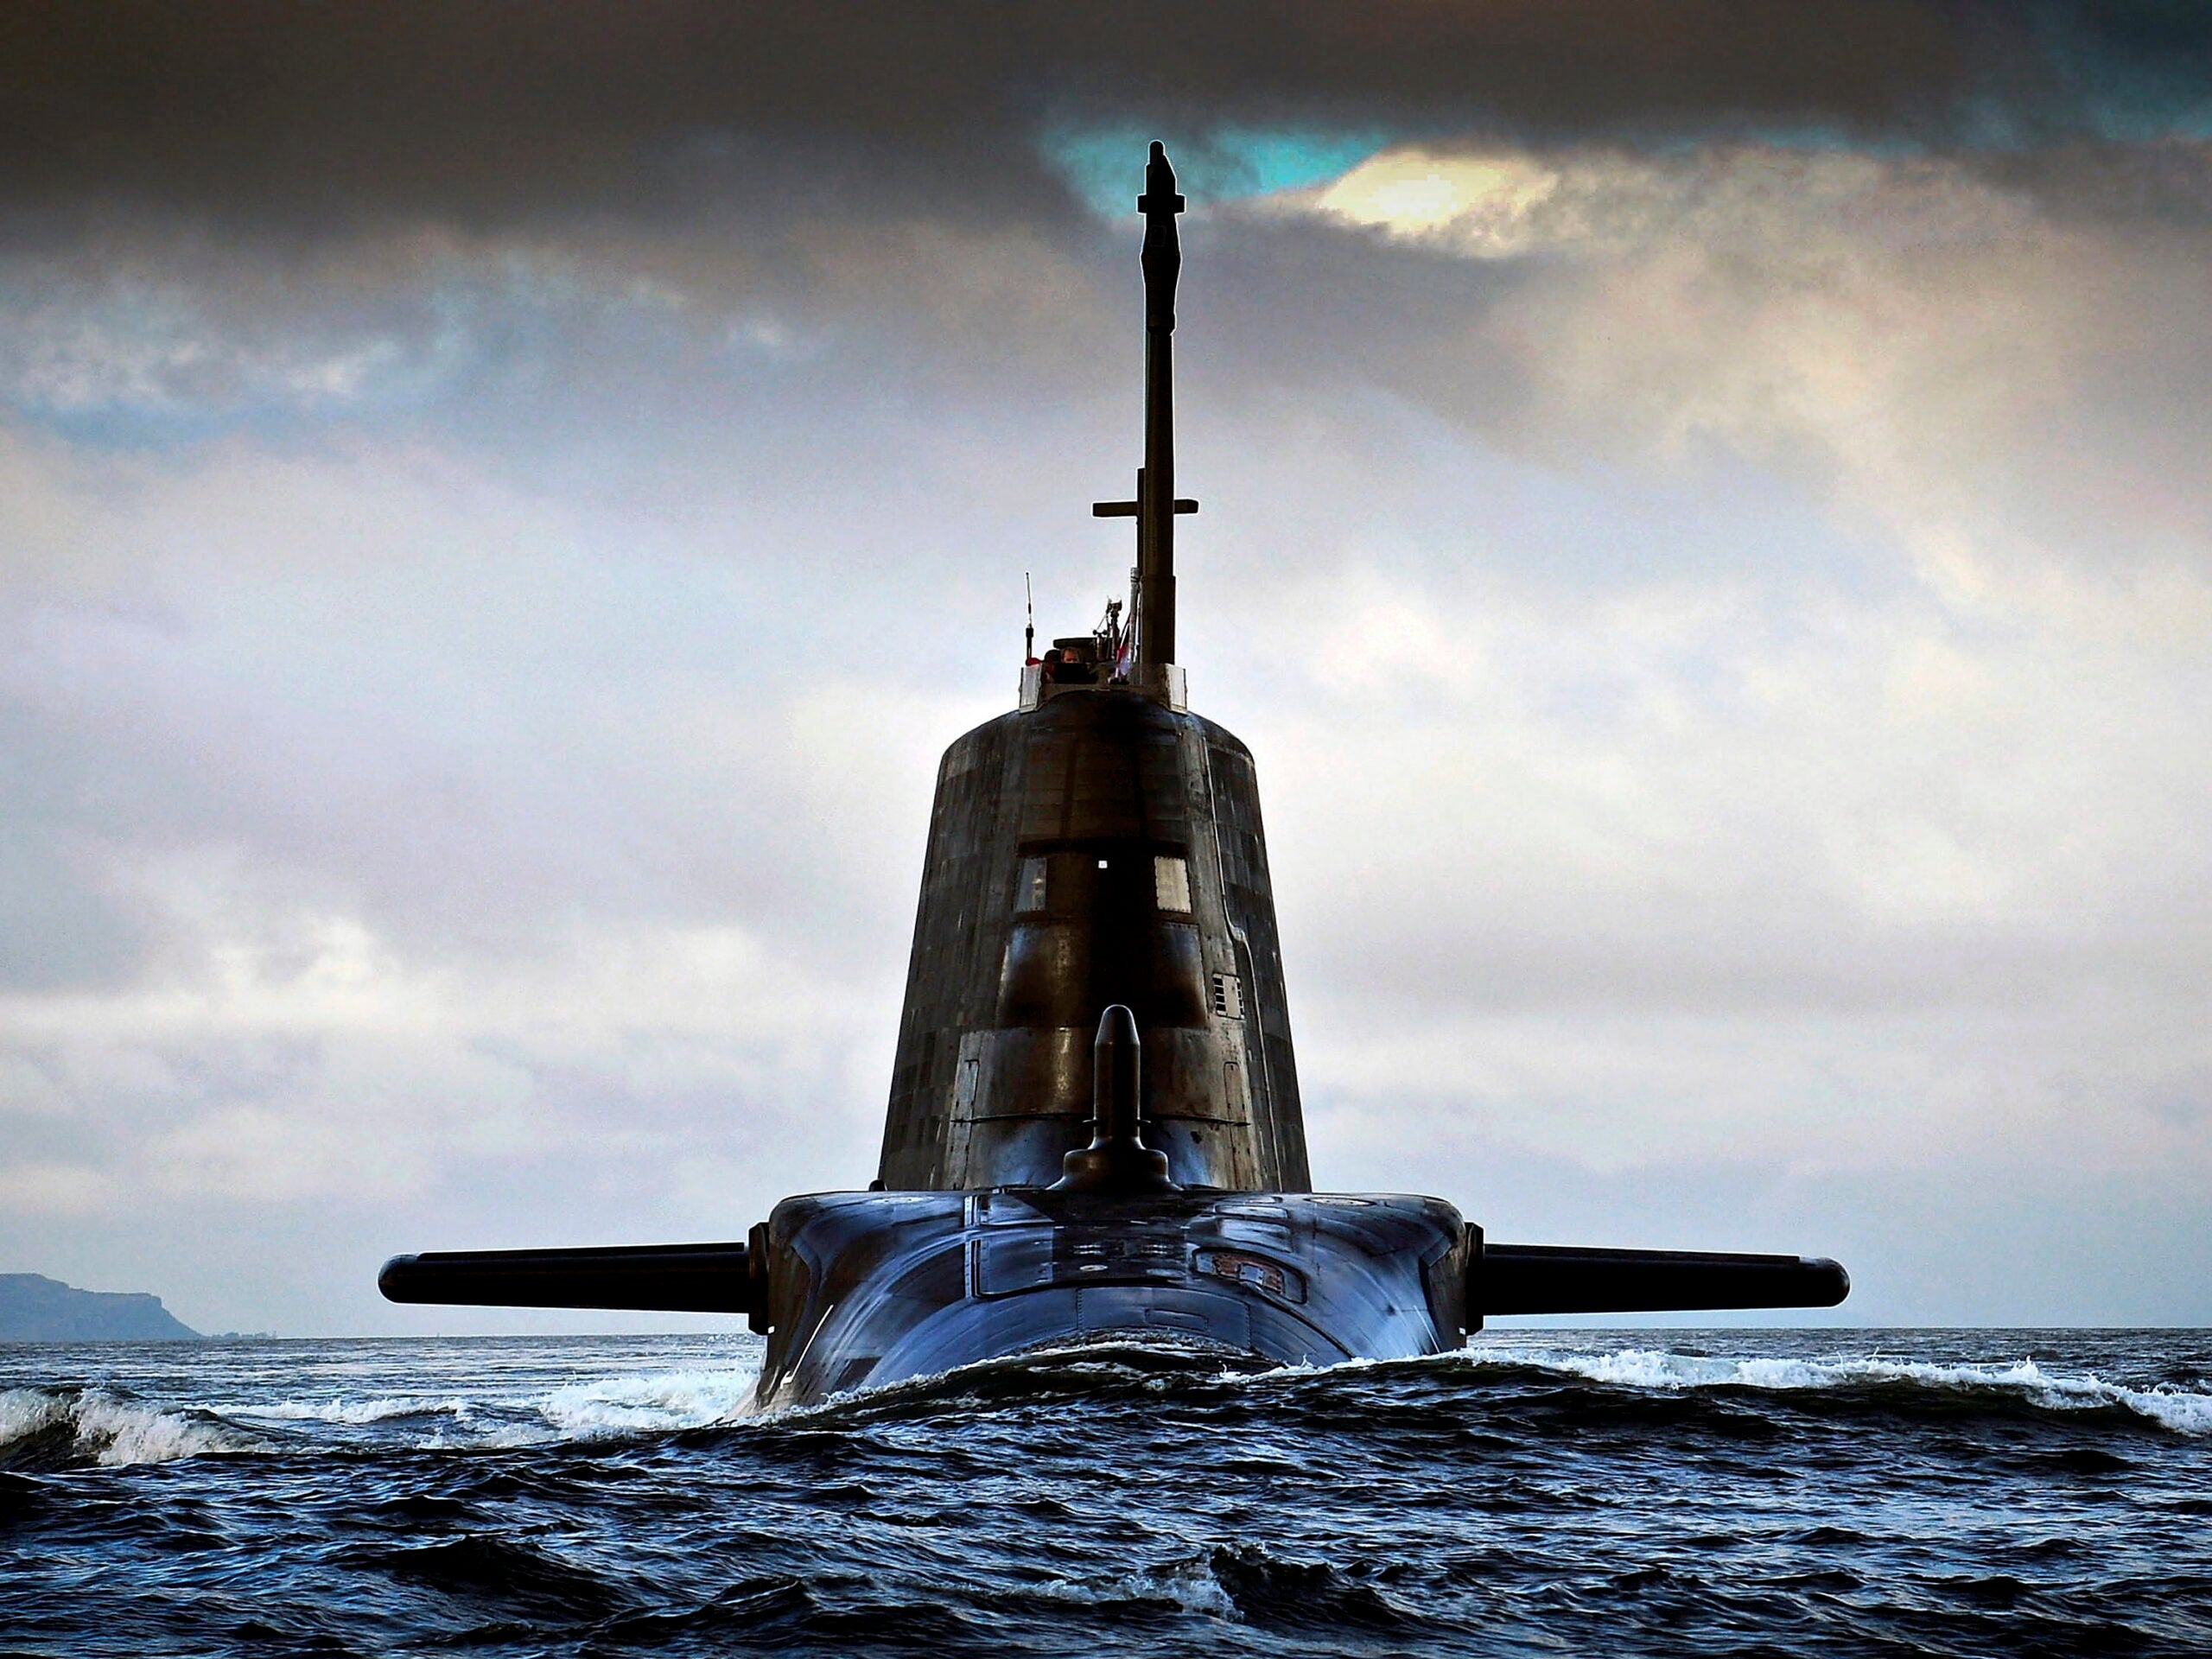 CPOA(Phot) Thomas 'Tam' McDonald; Pictured is HMS AMBUSH returning to HMNB Clyde on the Clyde estuary under moody summer skys Scotland..